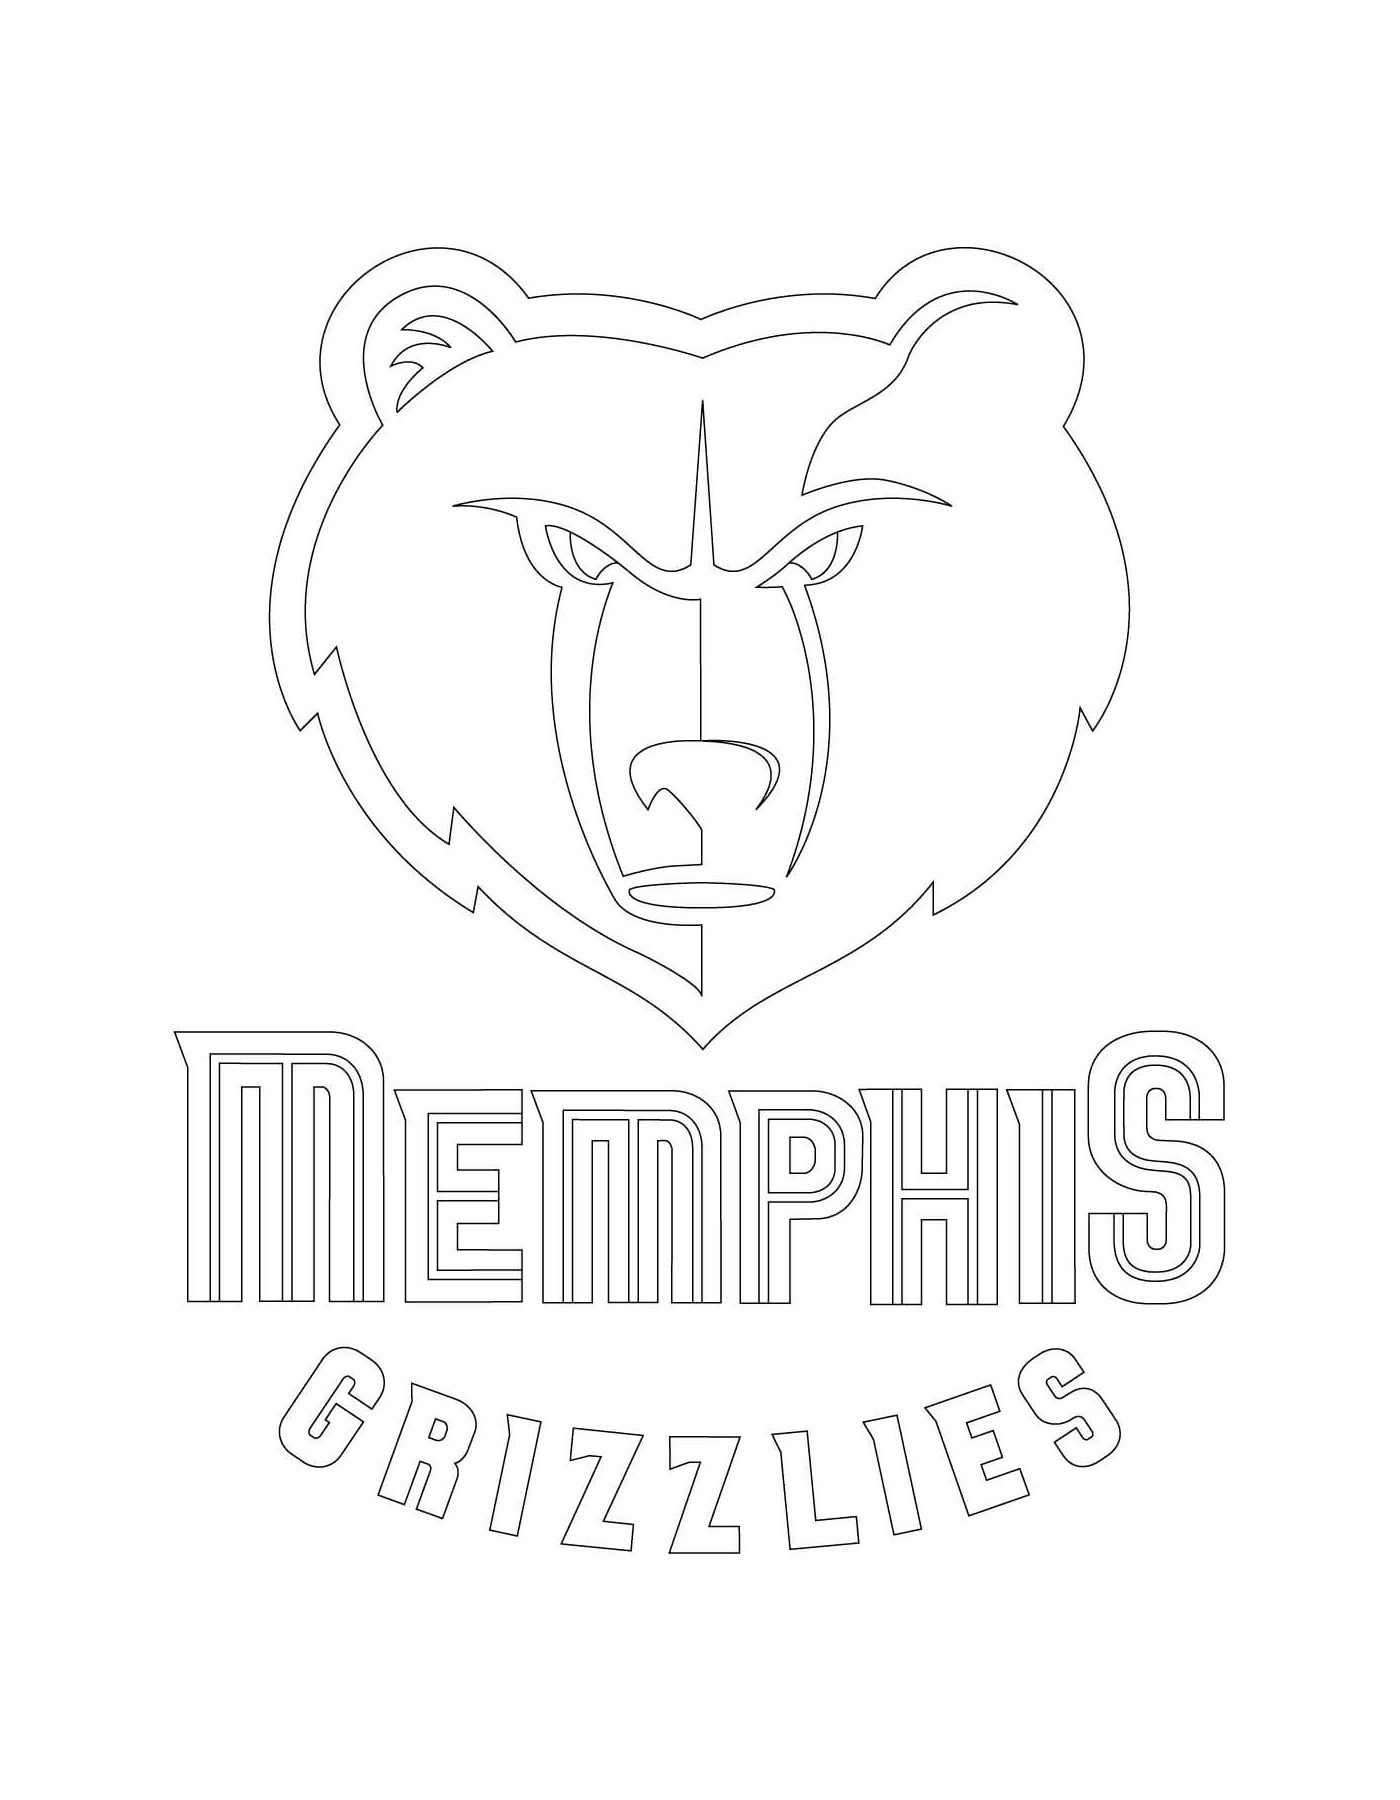  The logo of the Memphis Grizzlies of the NBA 